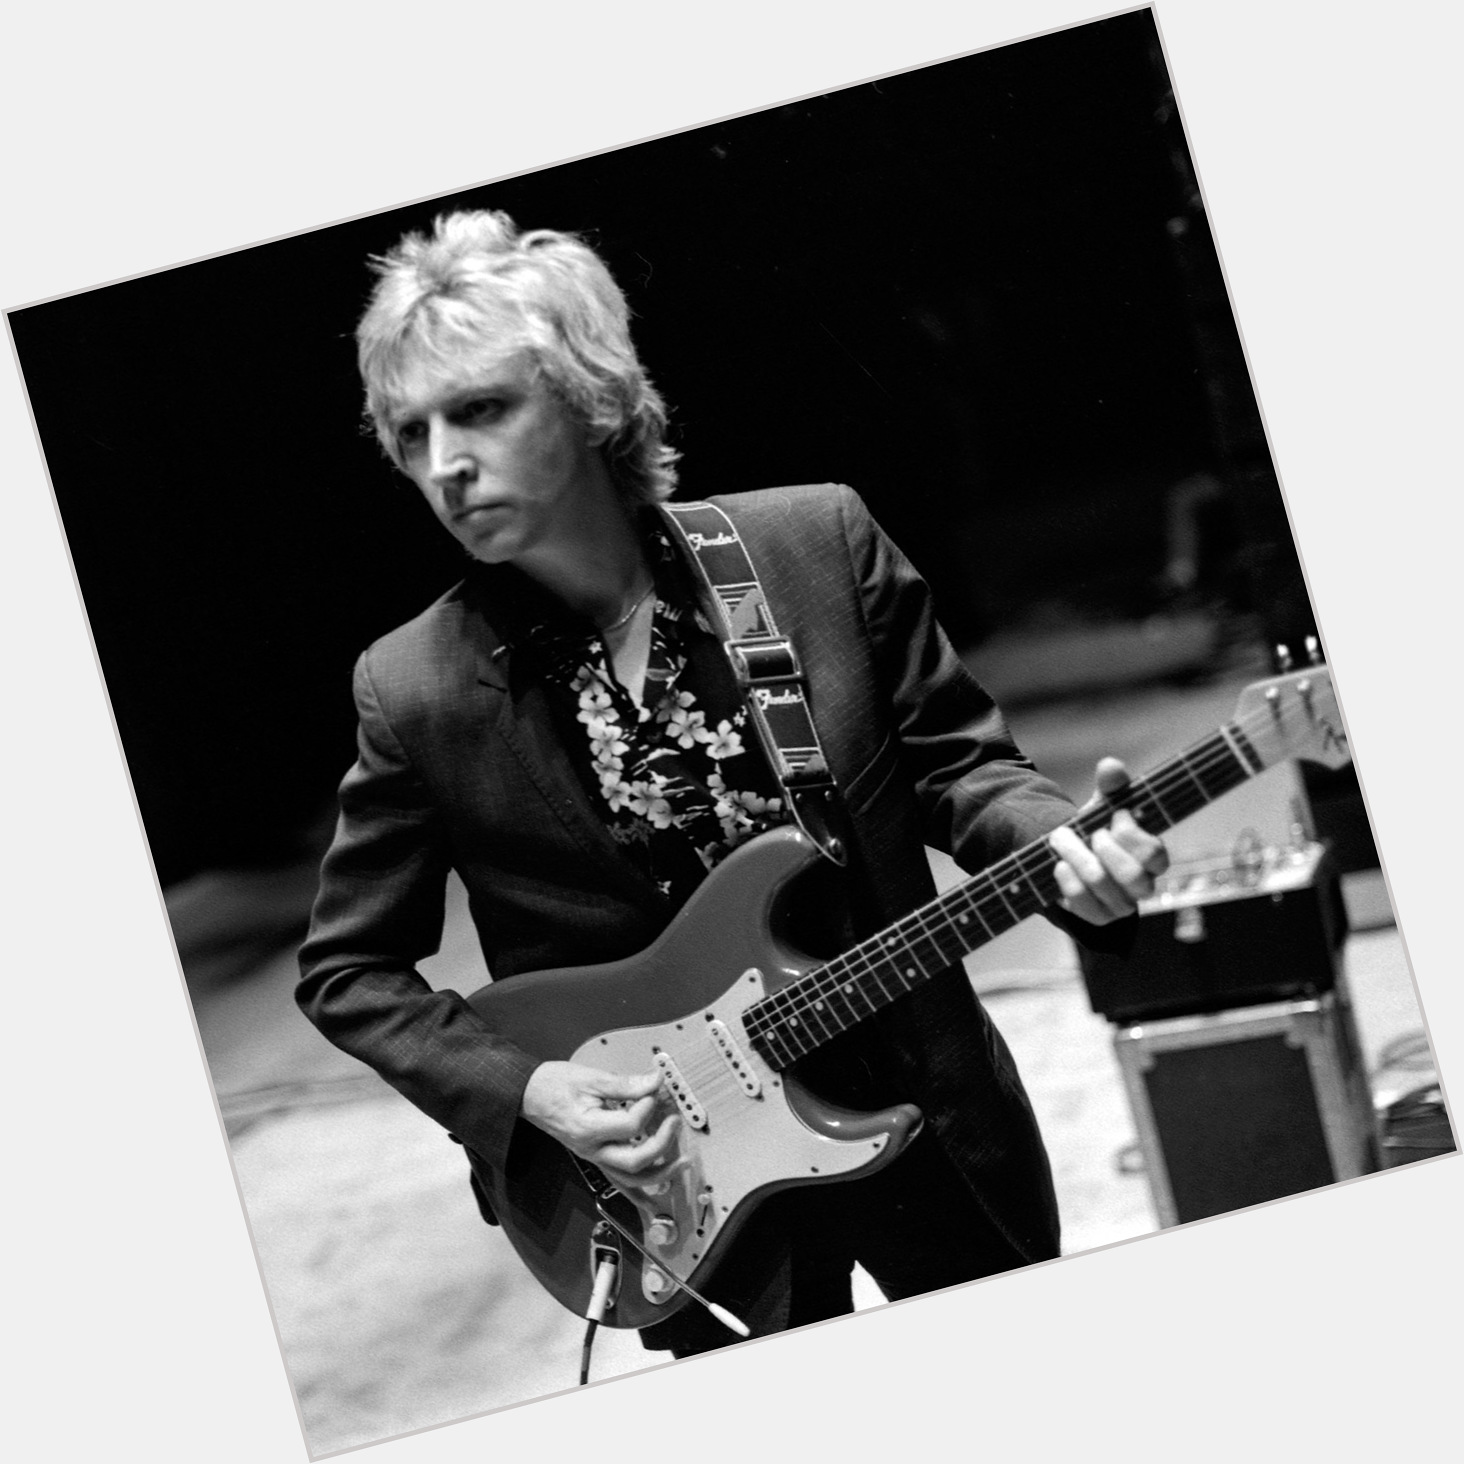 Happy 80th birthday to former Police guitarist Andy Summers! 